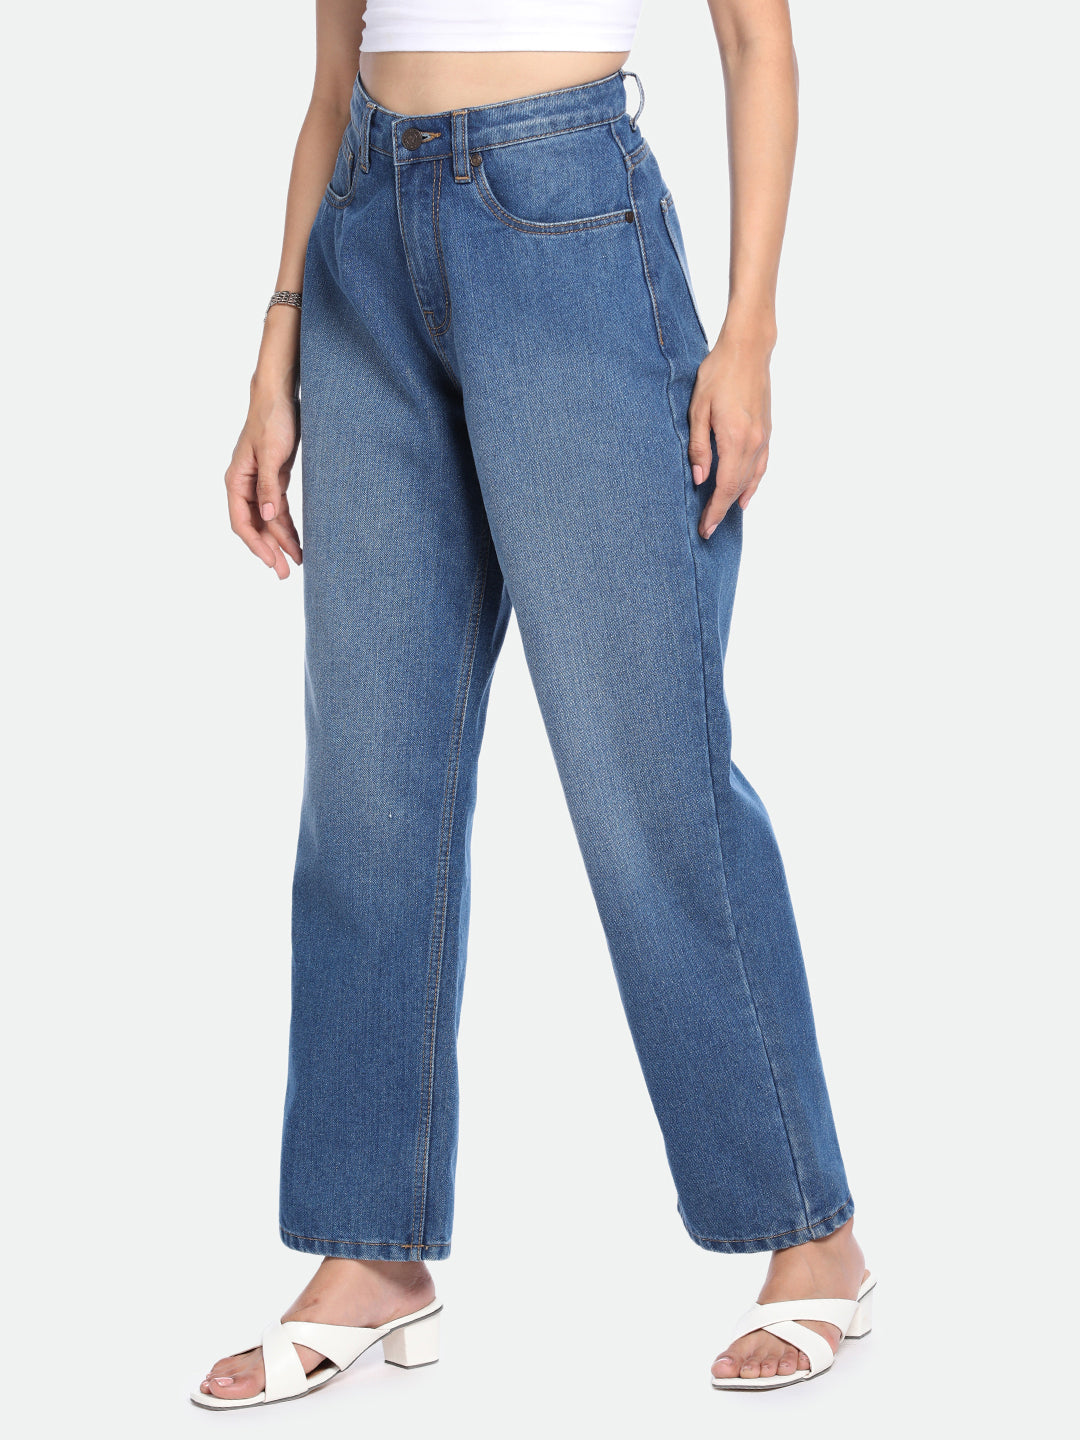 DL Woman Indigo Blue Relaxed Fit Jeans